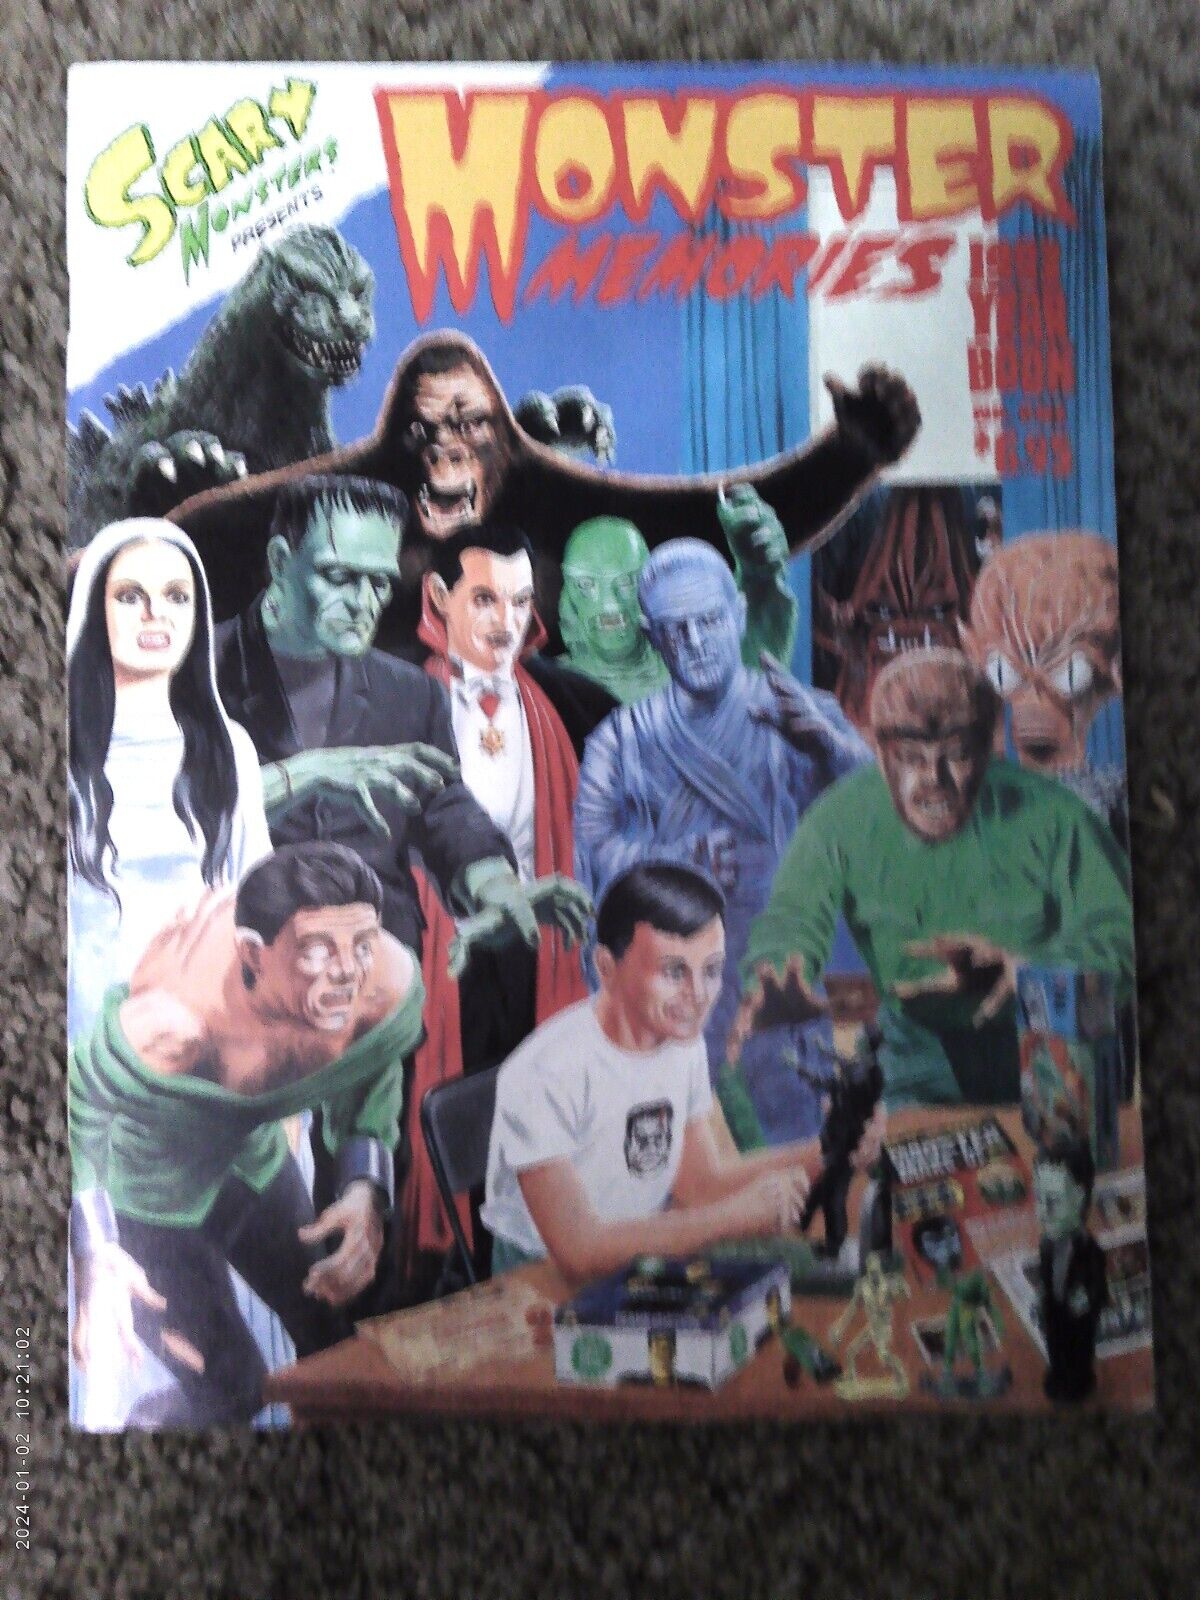 RARE MONSTER MEMORIES 1 - YEARBOOK 1993 - SCARY MONSTER - FINE 6.0